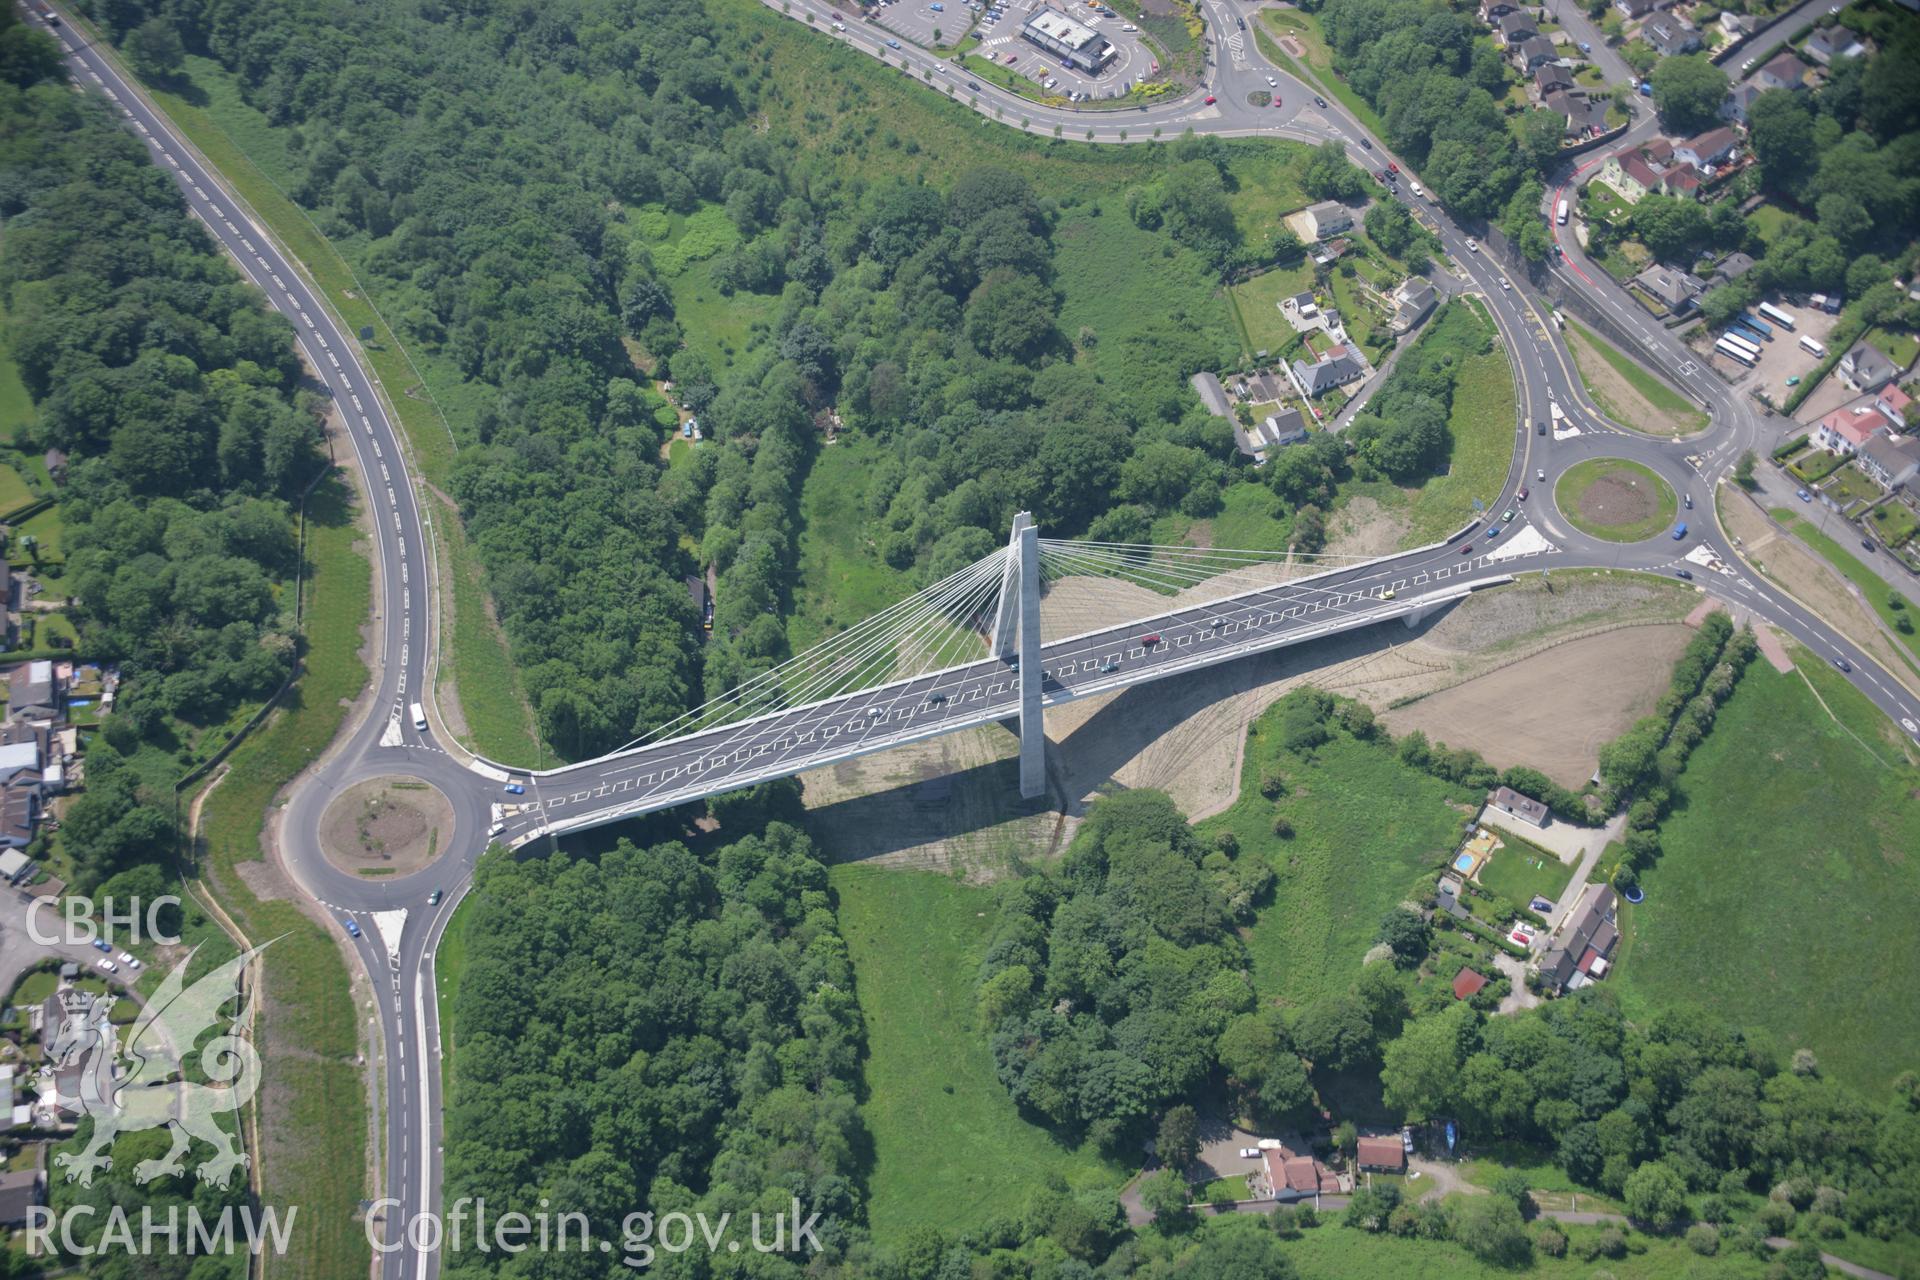 RCAHMW colour oblique aerial photograph of Chartist Bridge, Sirhowy Enterprise Way, Blackwood, from the north. Taken on 09 June 2006 by Toby Driver.